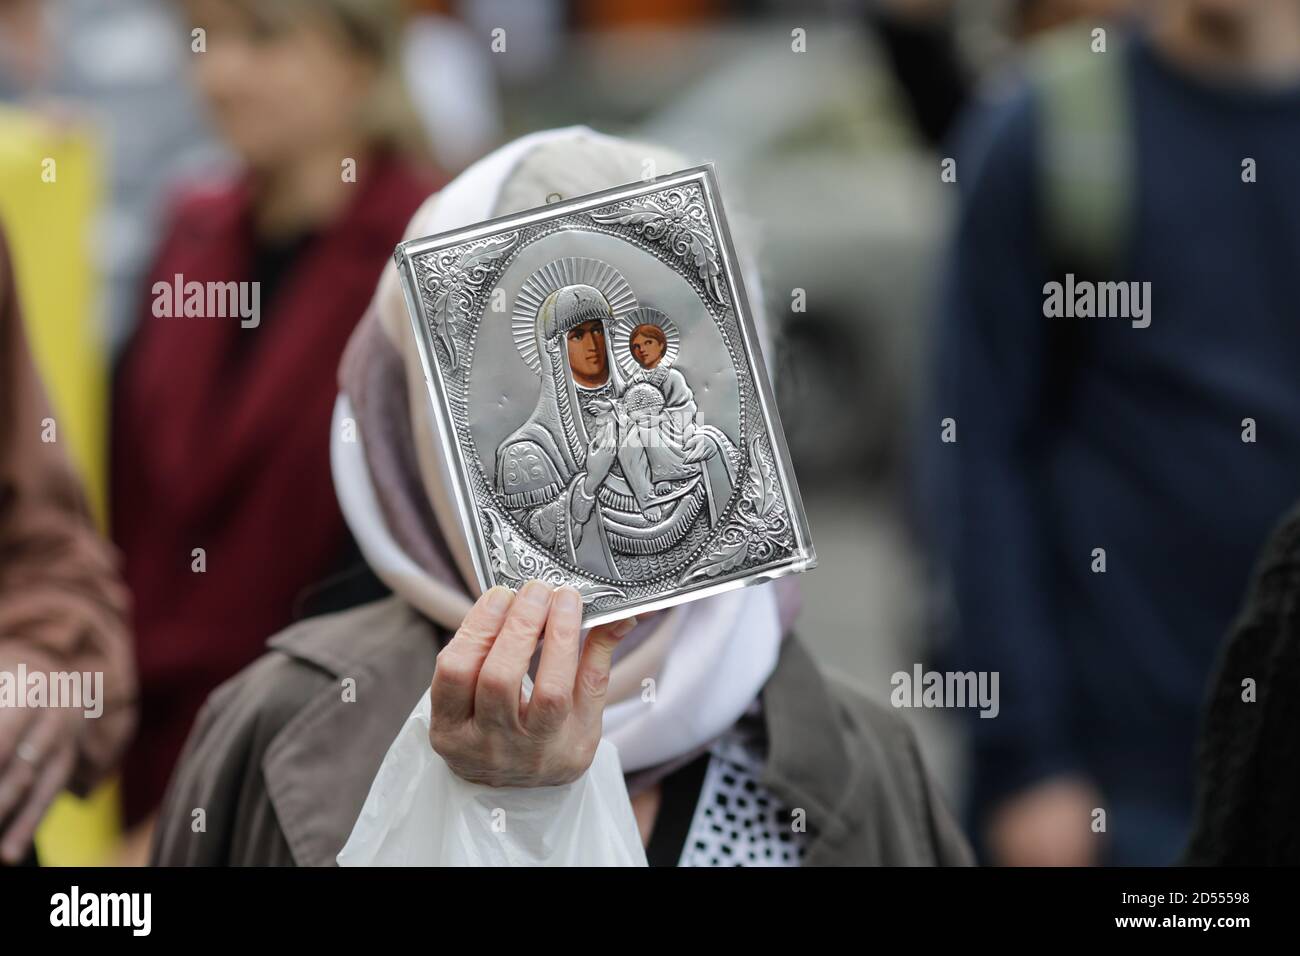 Bucharest, Romania - October 10, 2020: Details with a senior woman holding an Orthodox Church icon during a political rally. Stock Photo